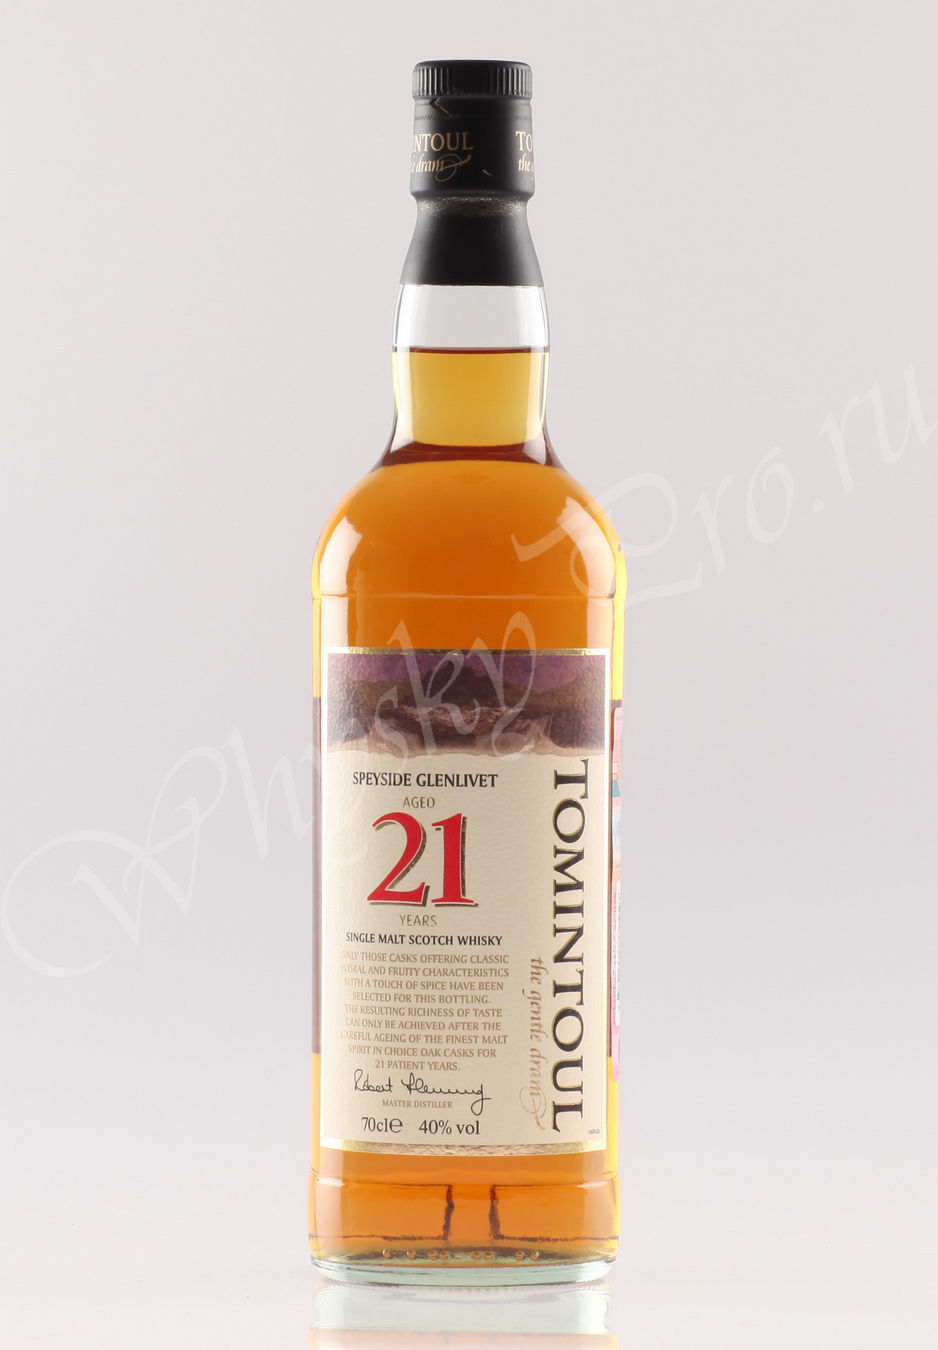 Tomintoul 21 years